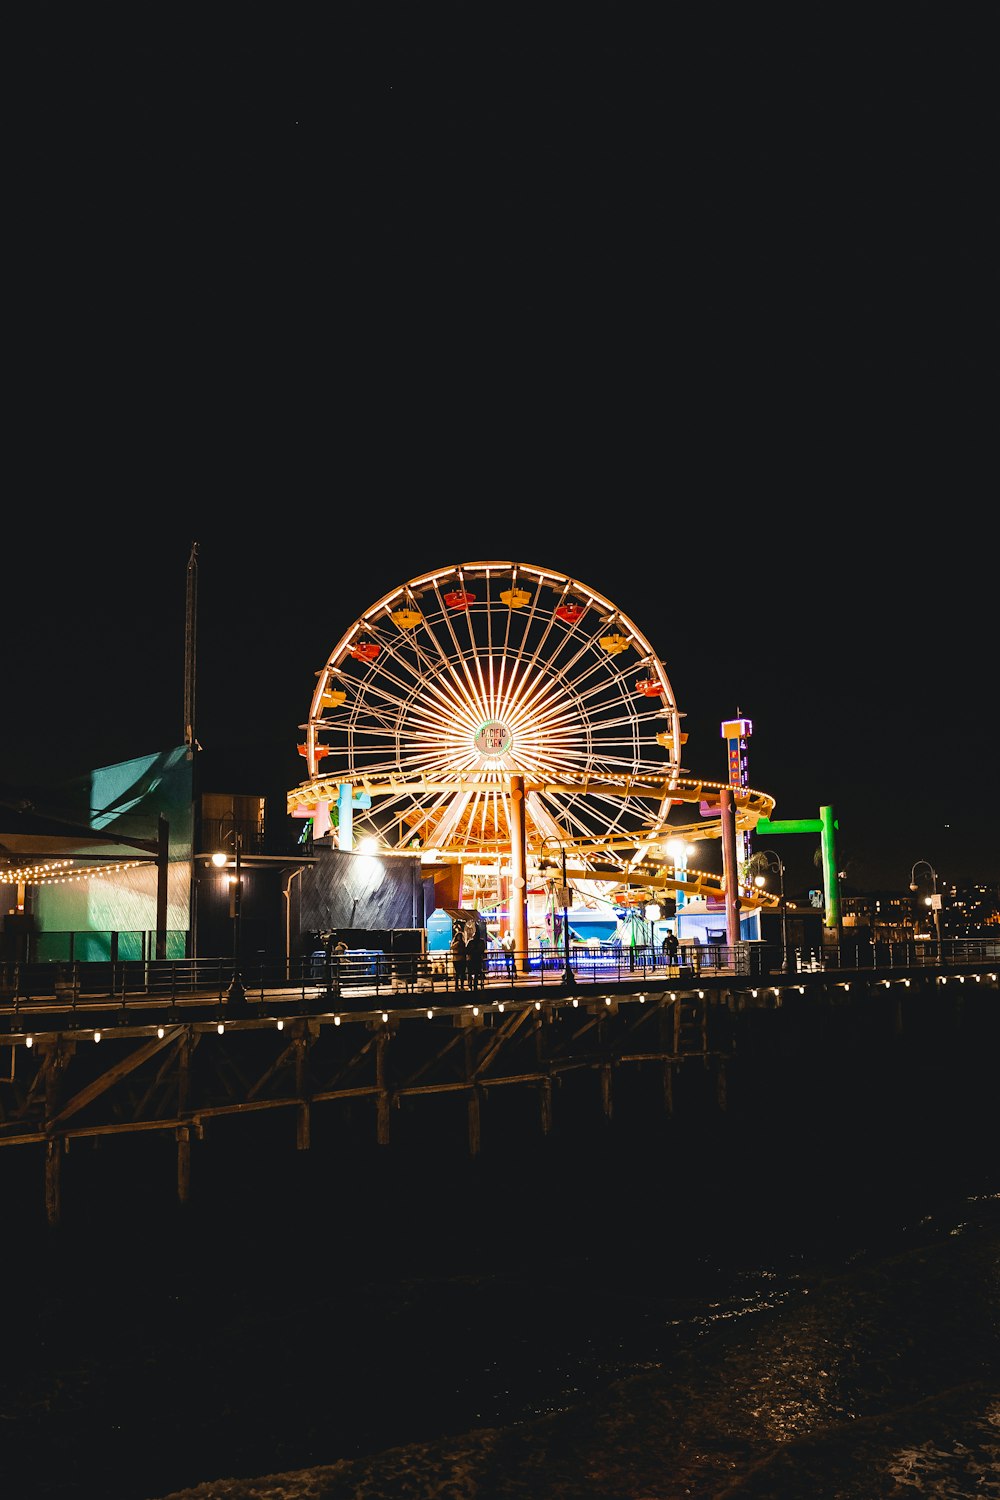 a large ferris wheel sitting on top of a pier